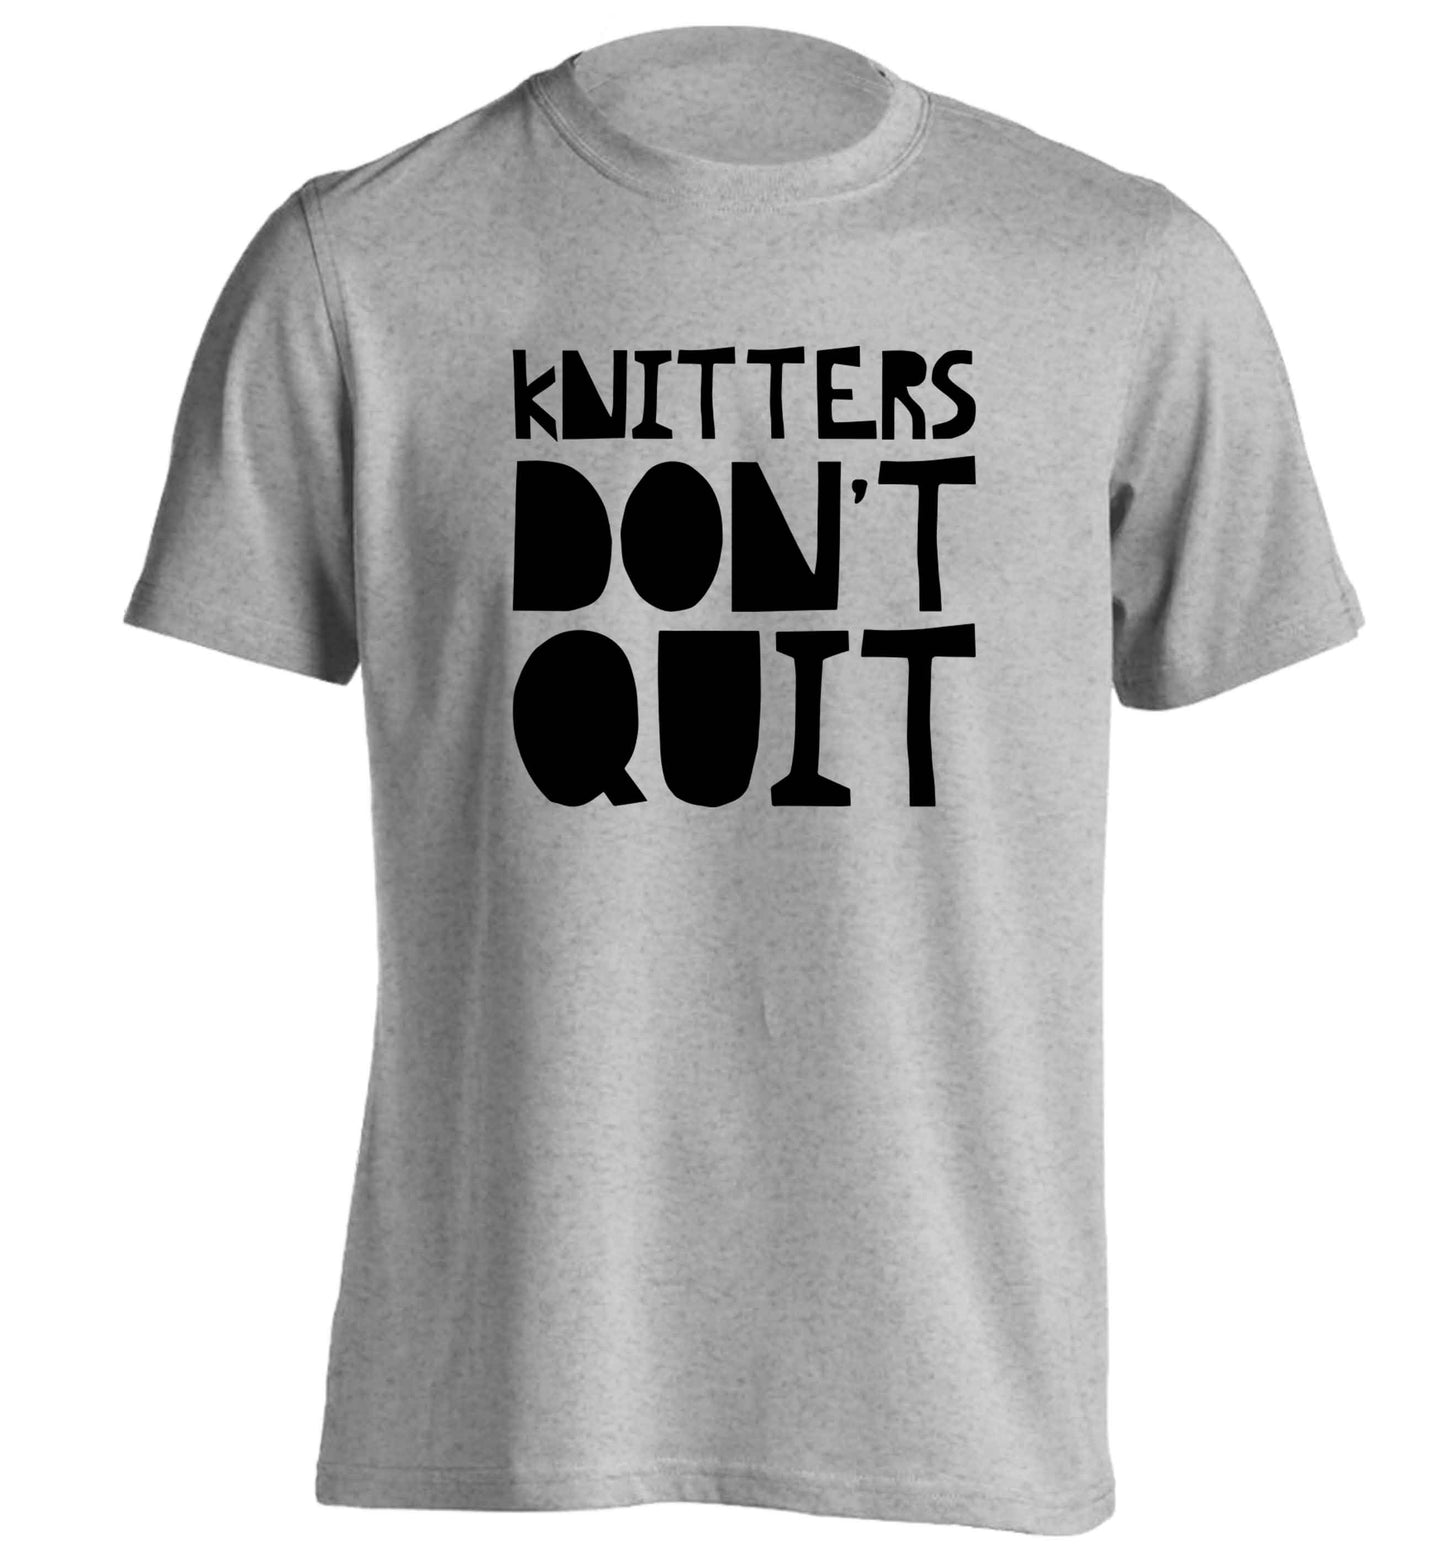 Knitters don't quit adults unisex grey Tshirt 2XL